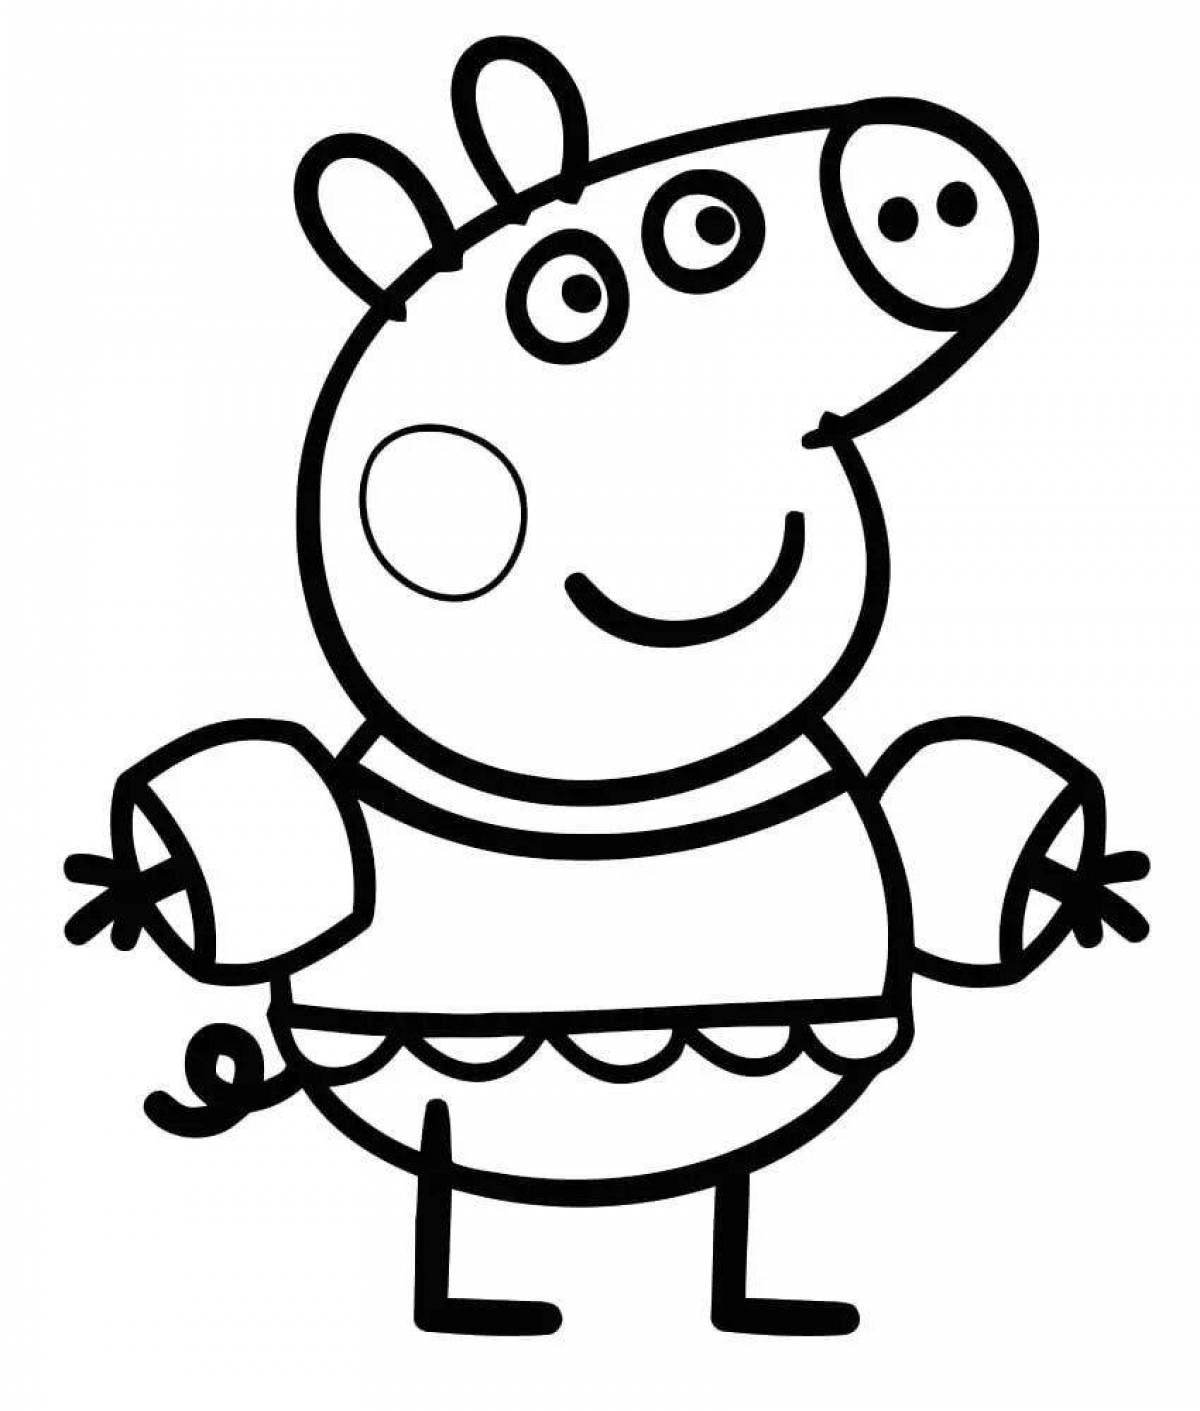 Bright peppa pig coloring for kids